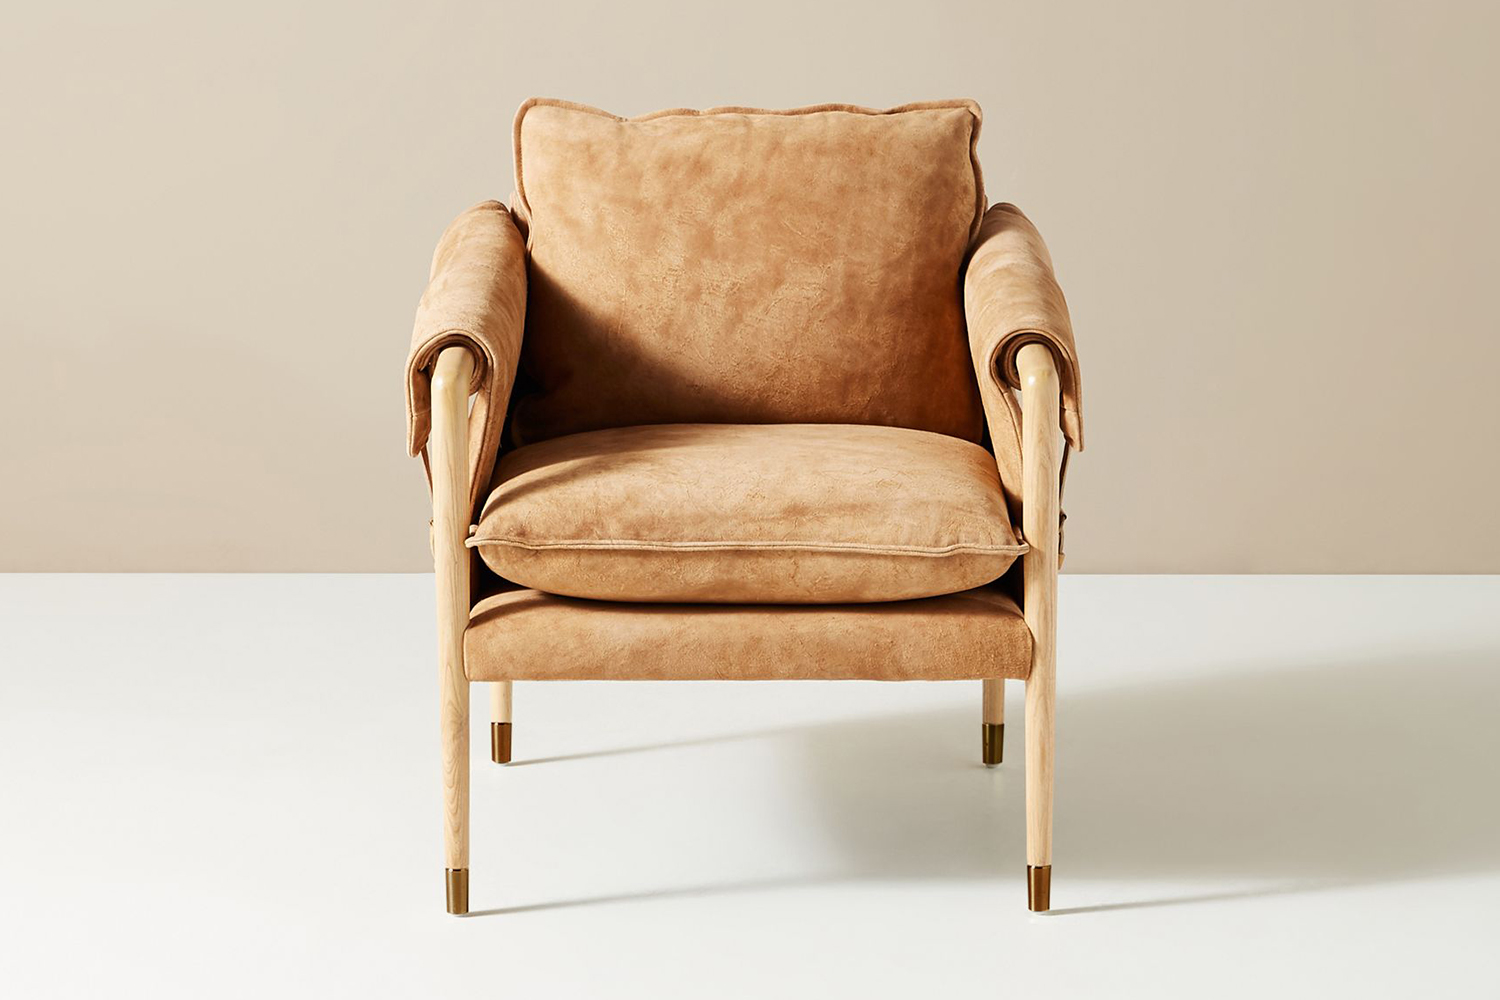 Havana Leather Chair in suede from Anthropologie